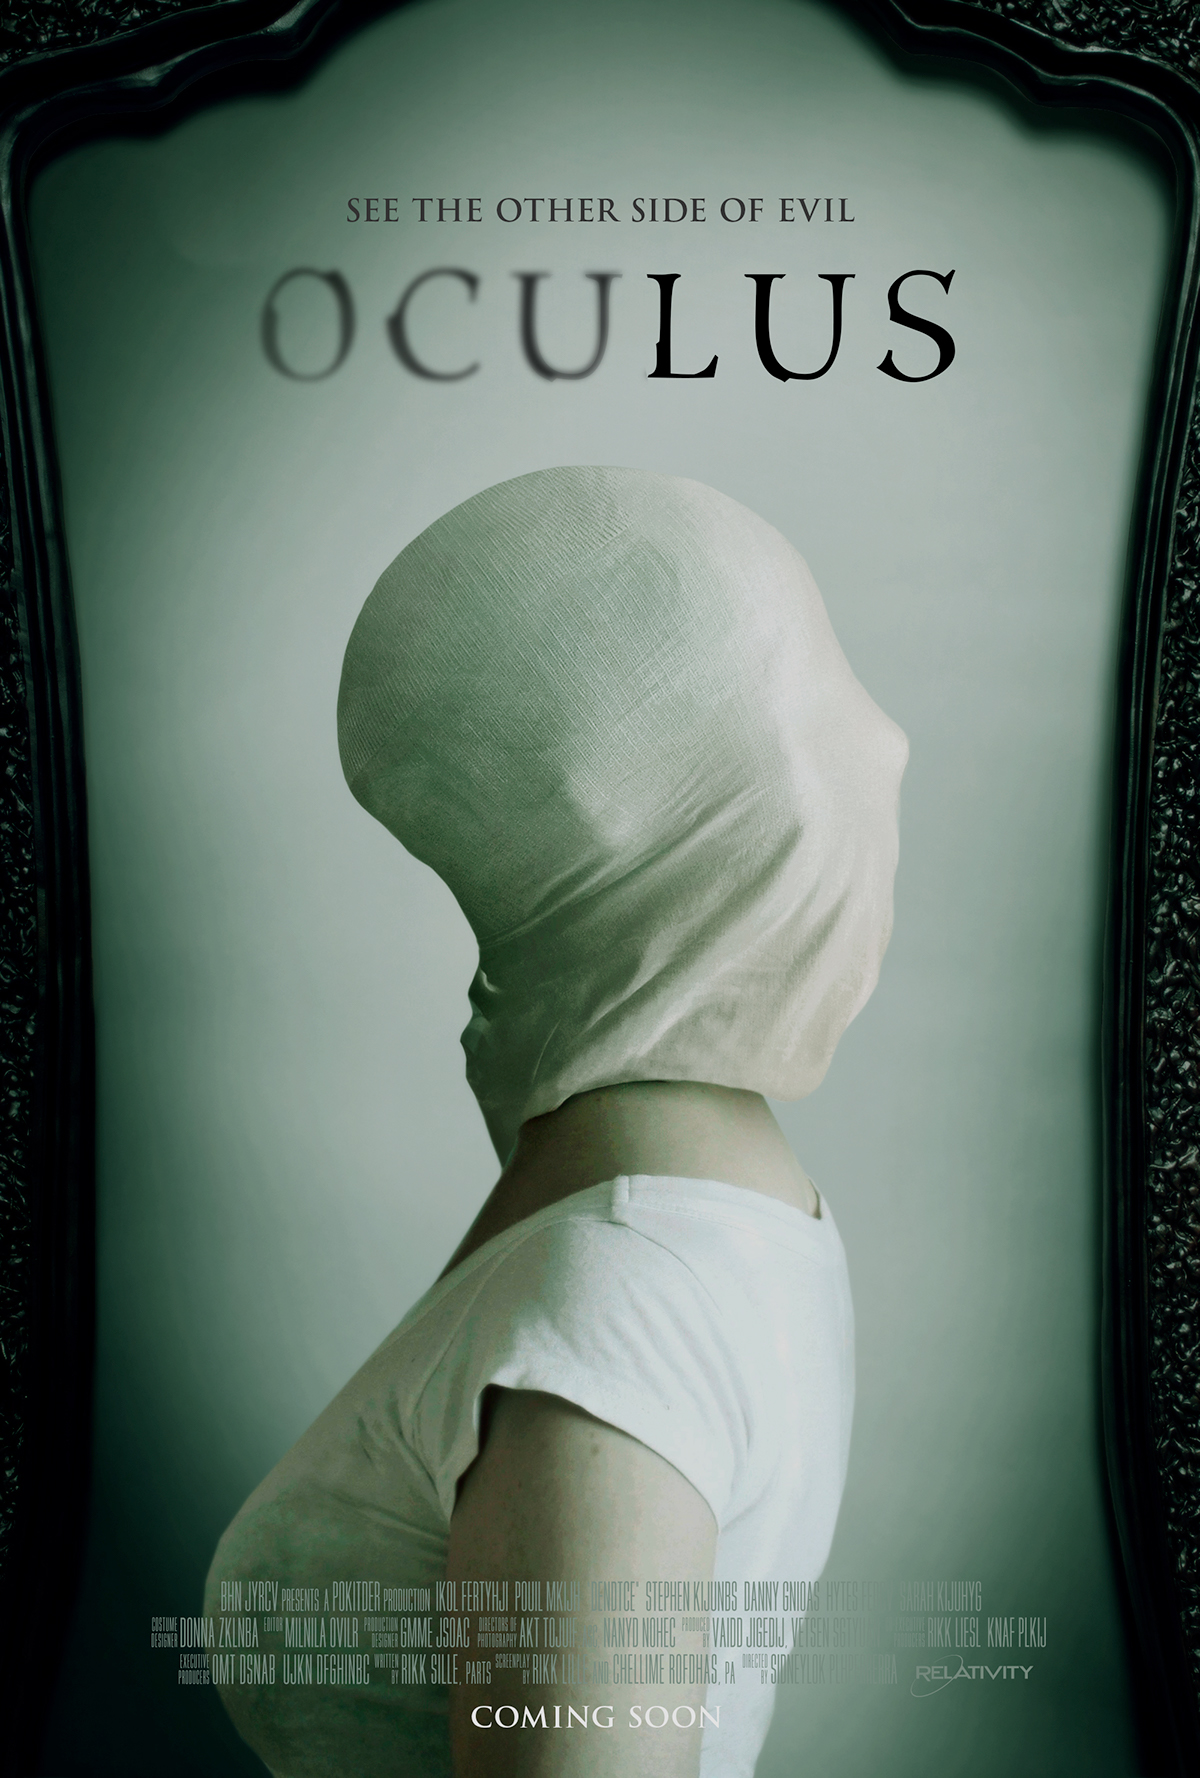 Theatrical one sheet Oculus movie